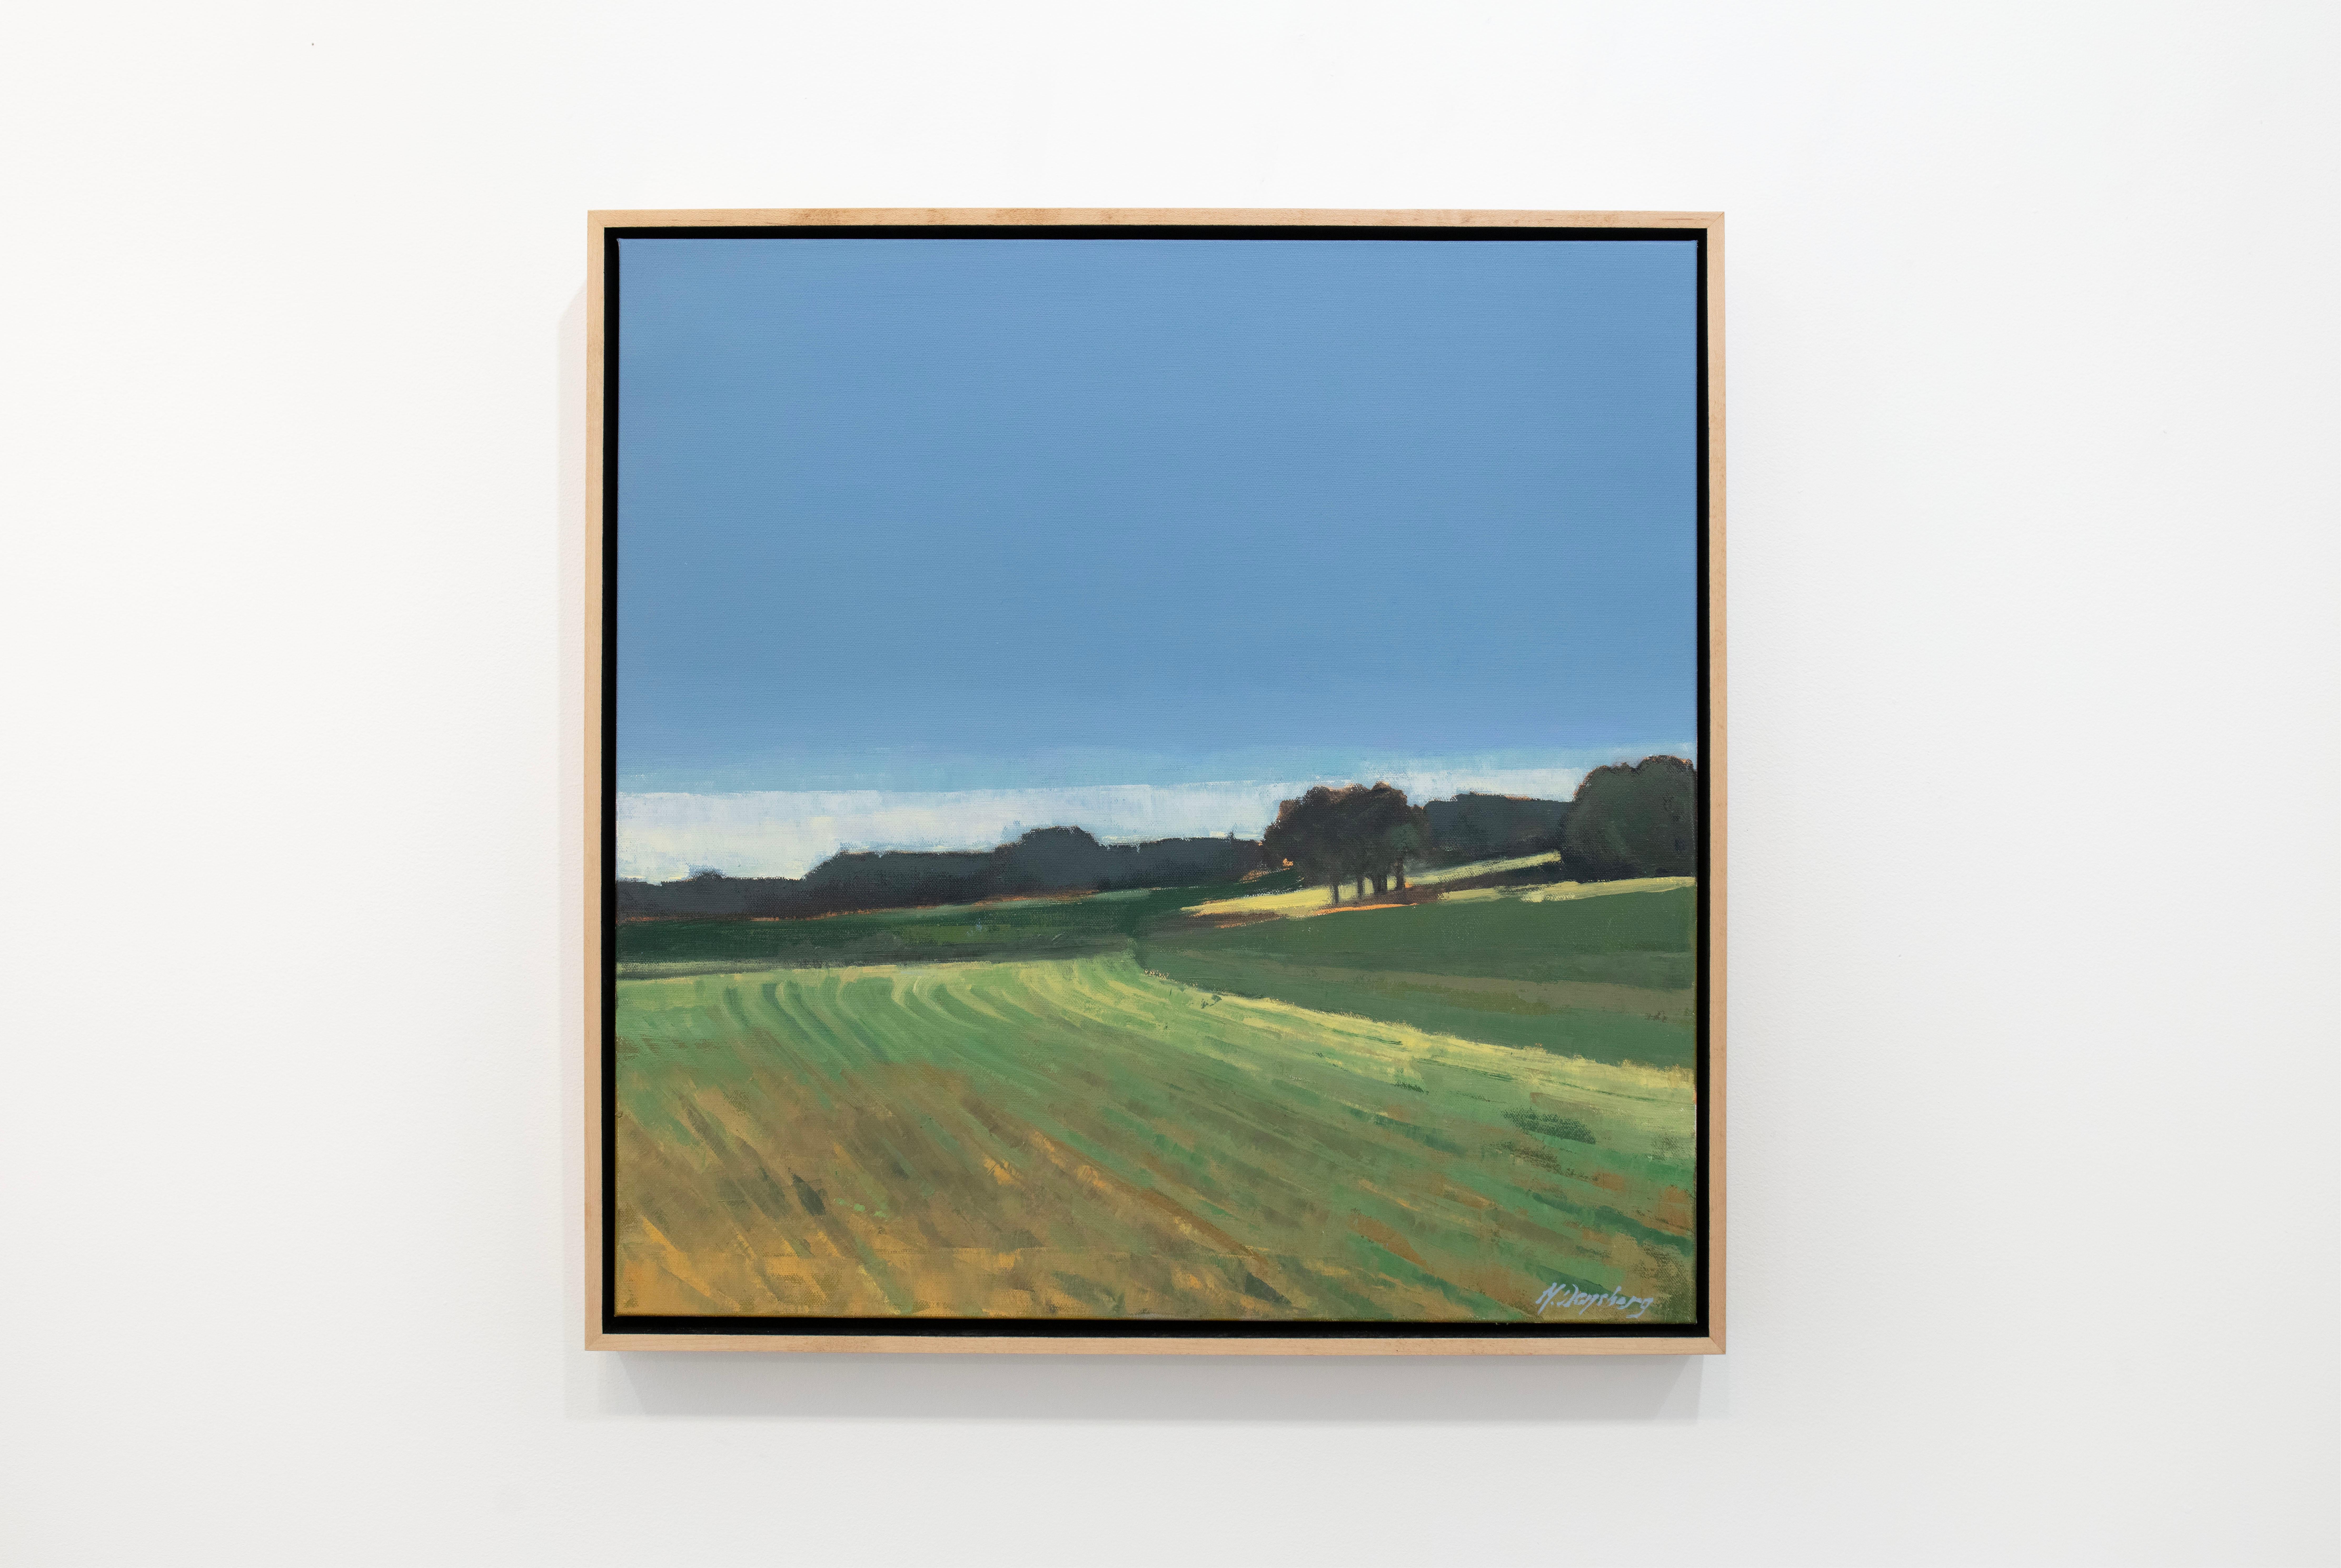 This abstracted landscape painting by Molly Doe Wensberg features a cool blue and green palette with warm yellow accents. The artist captures a scene of a field with lush foliage along the horizon beneath a clean blue sky. The painting itself is 24"